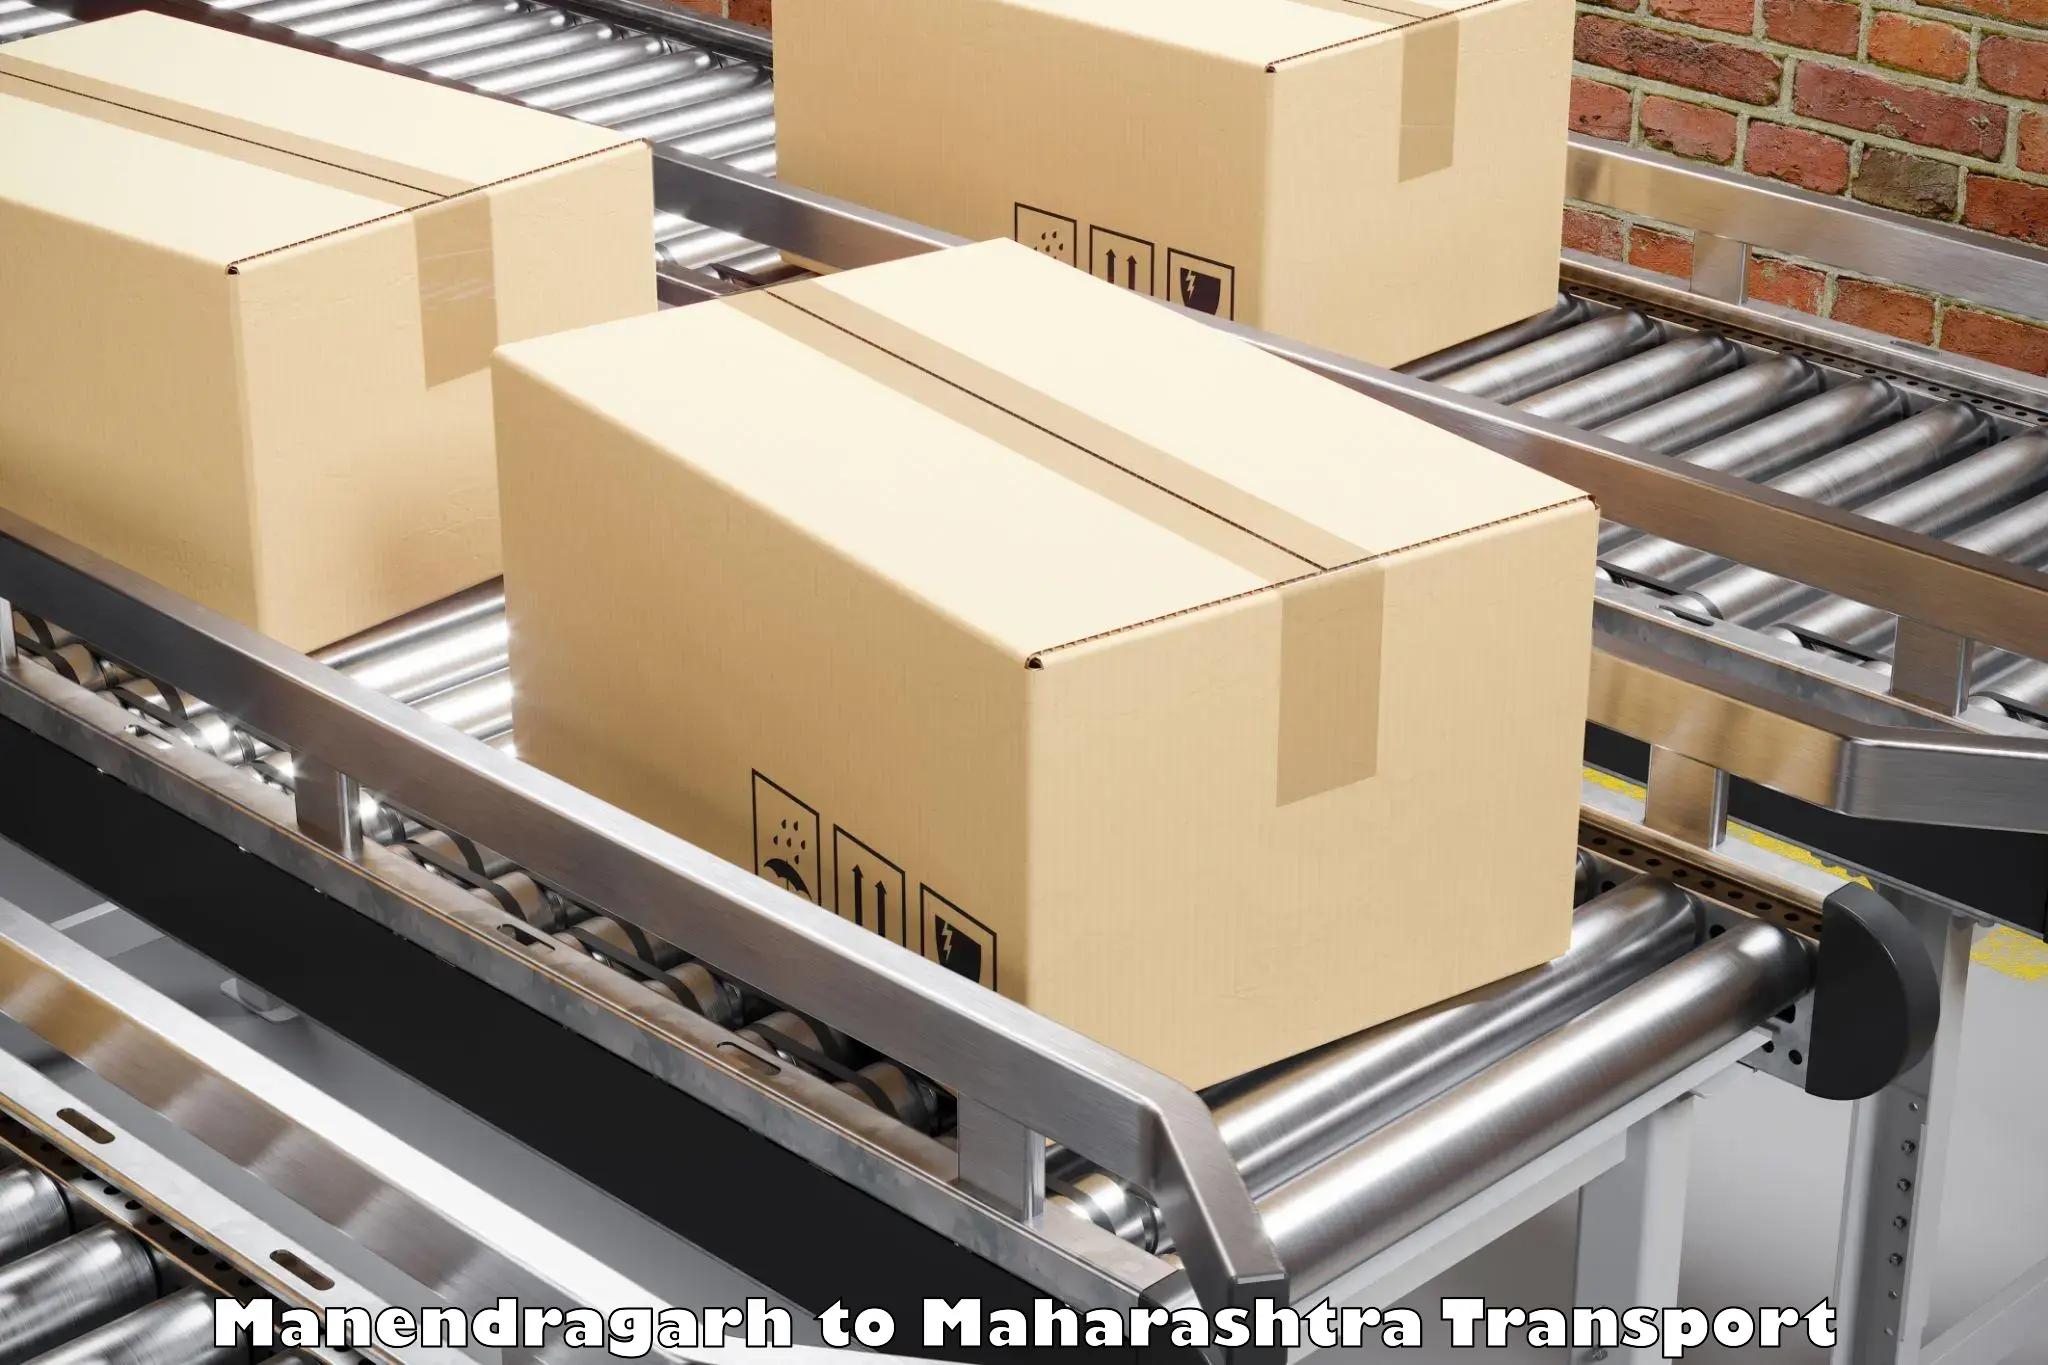 Air freight transport services Manendragarh to Chandrapur